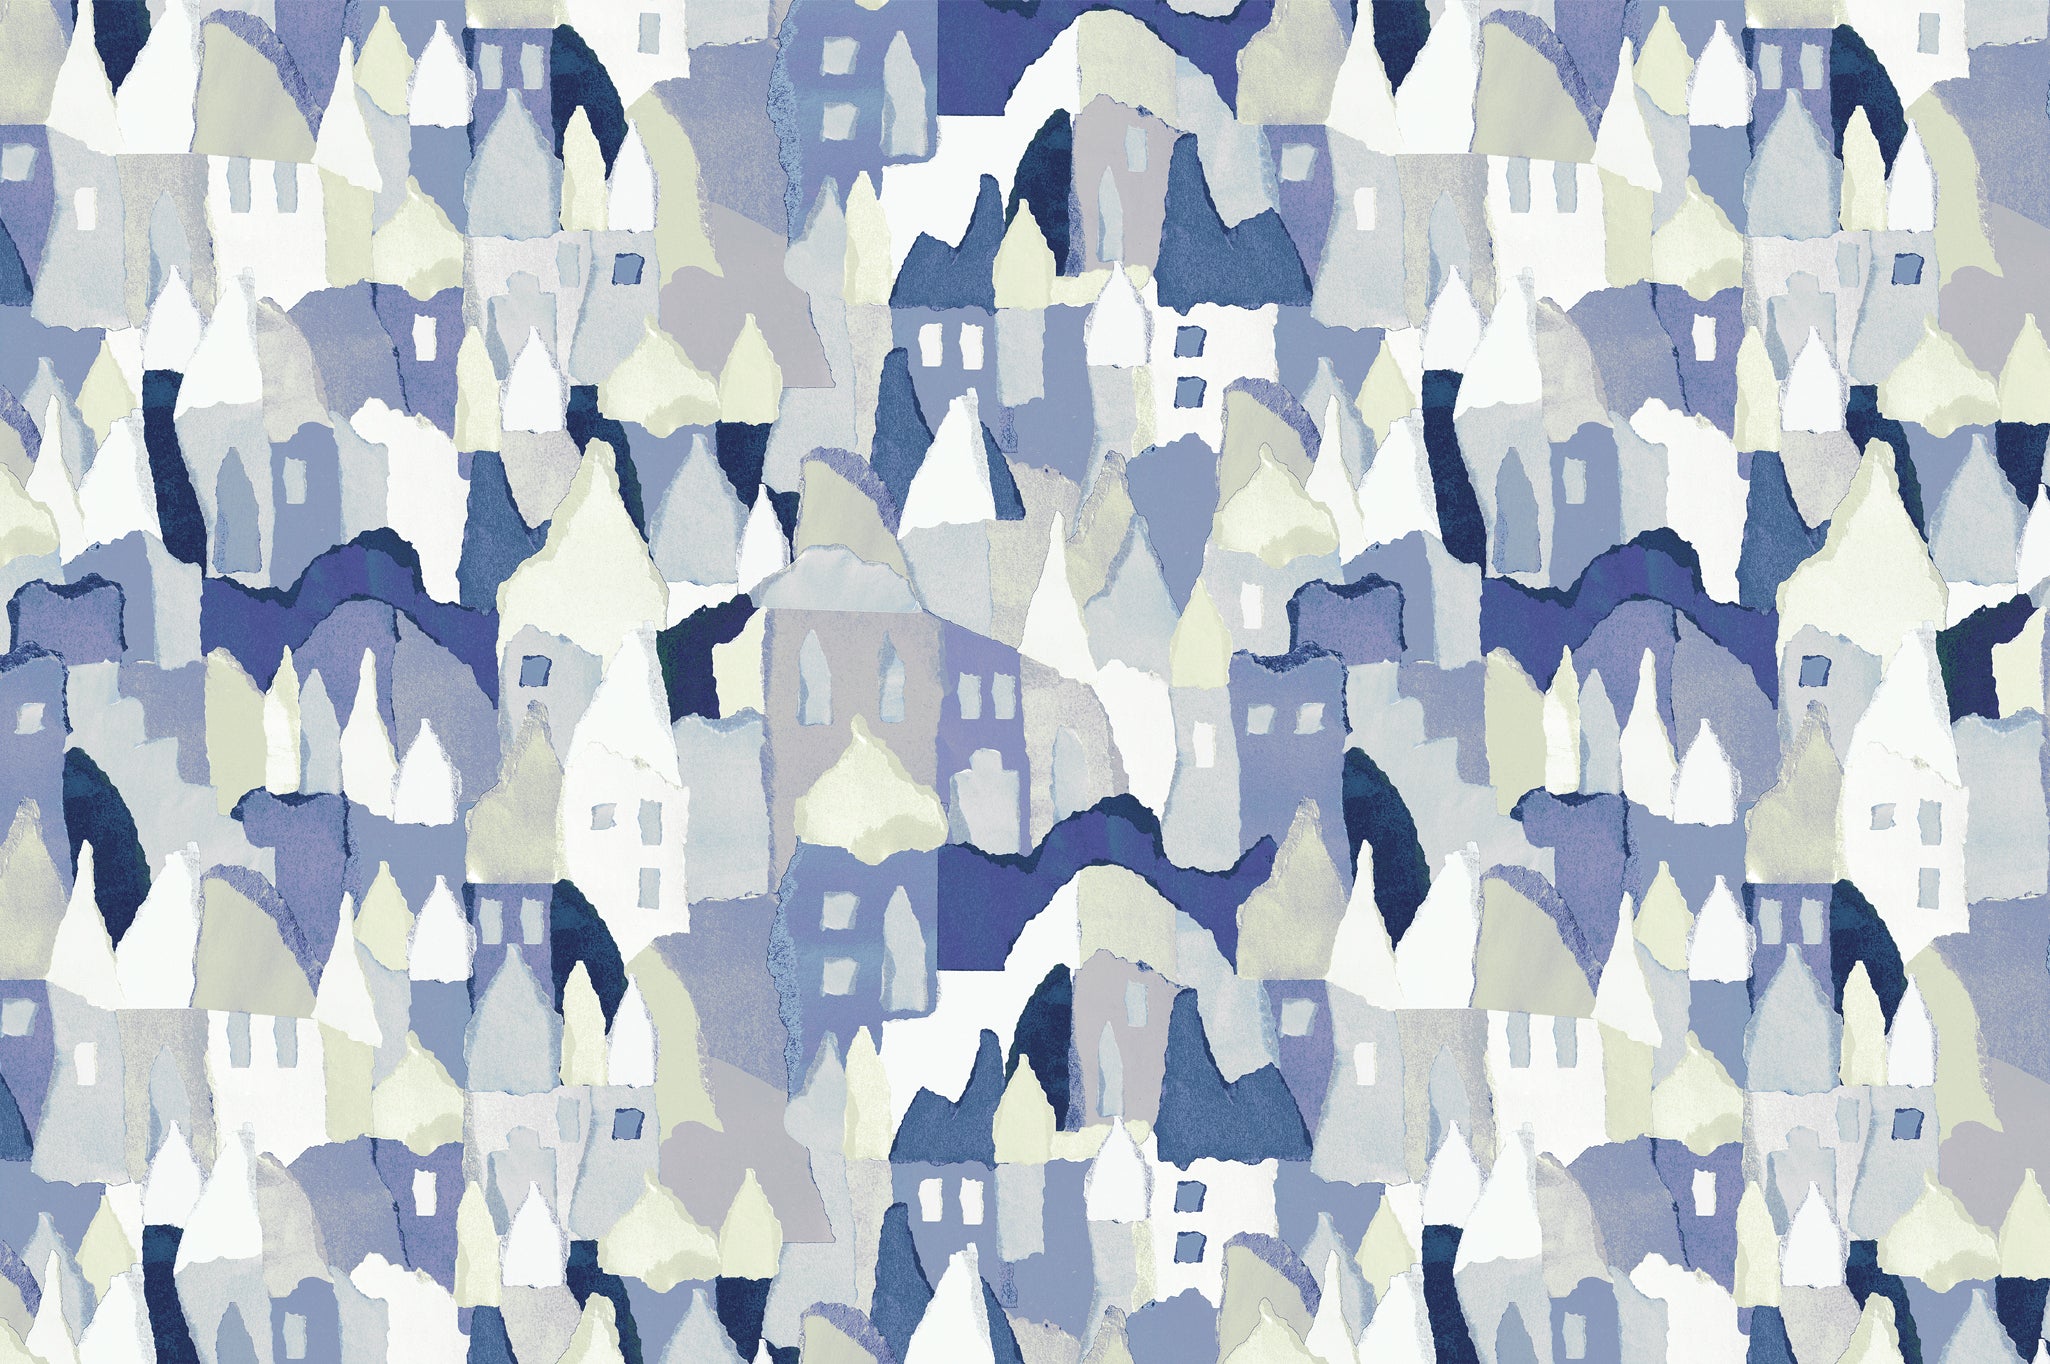 Detail of wallpaper in a playful house print in shades of blue, navy, yellow and cream.